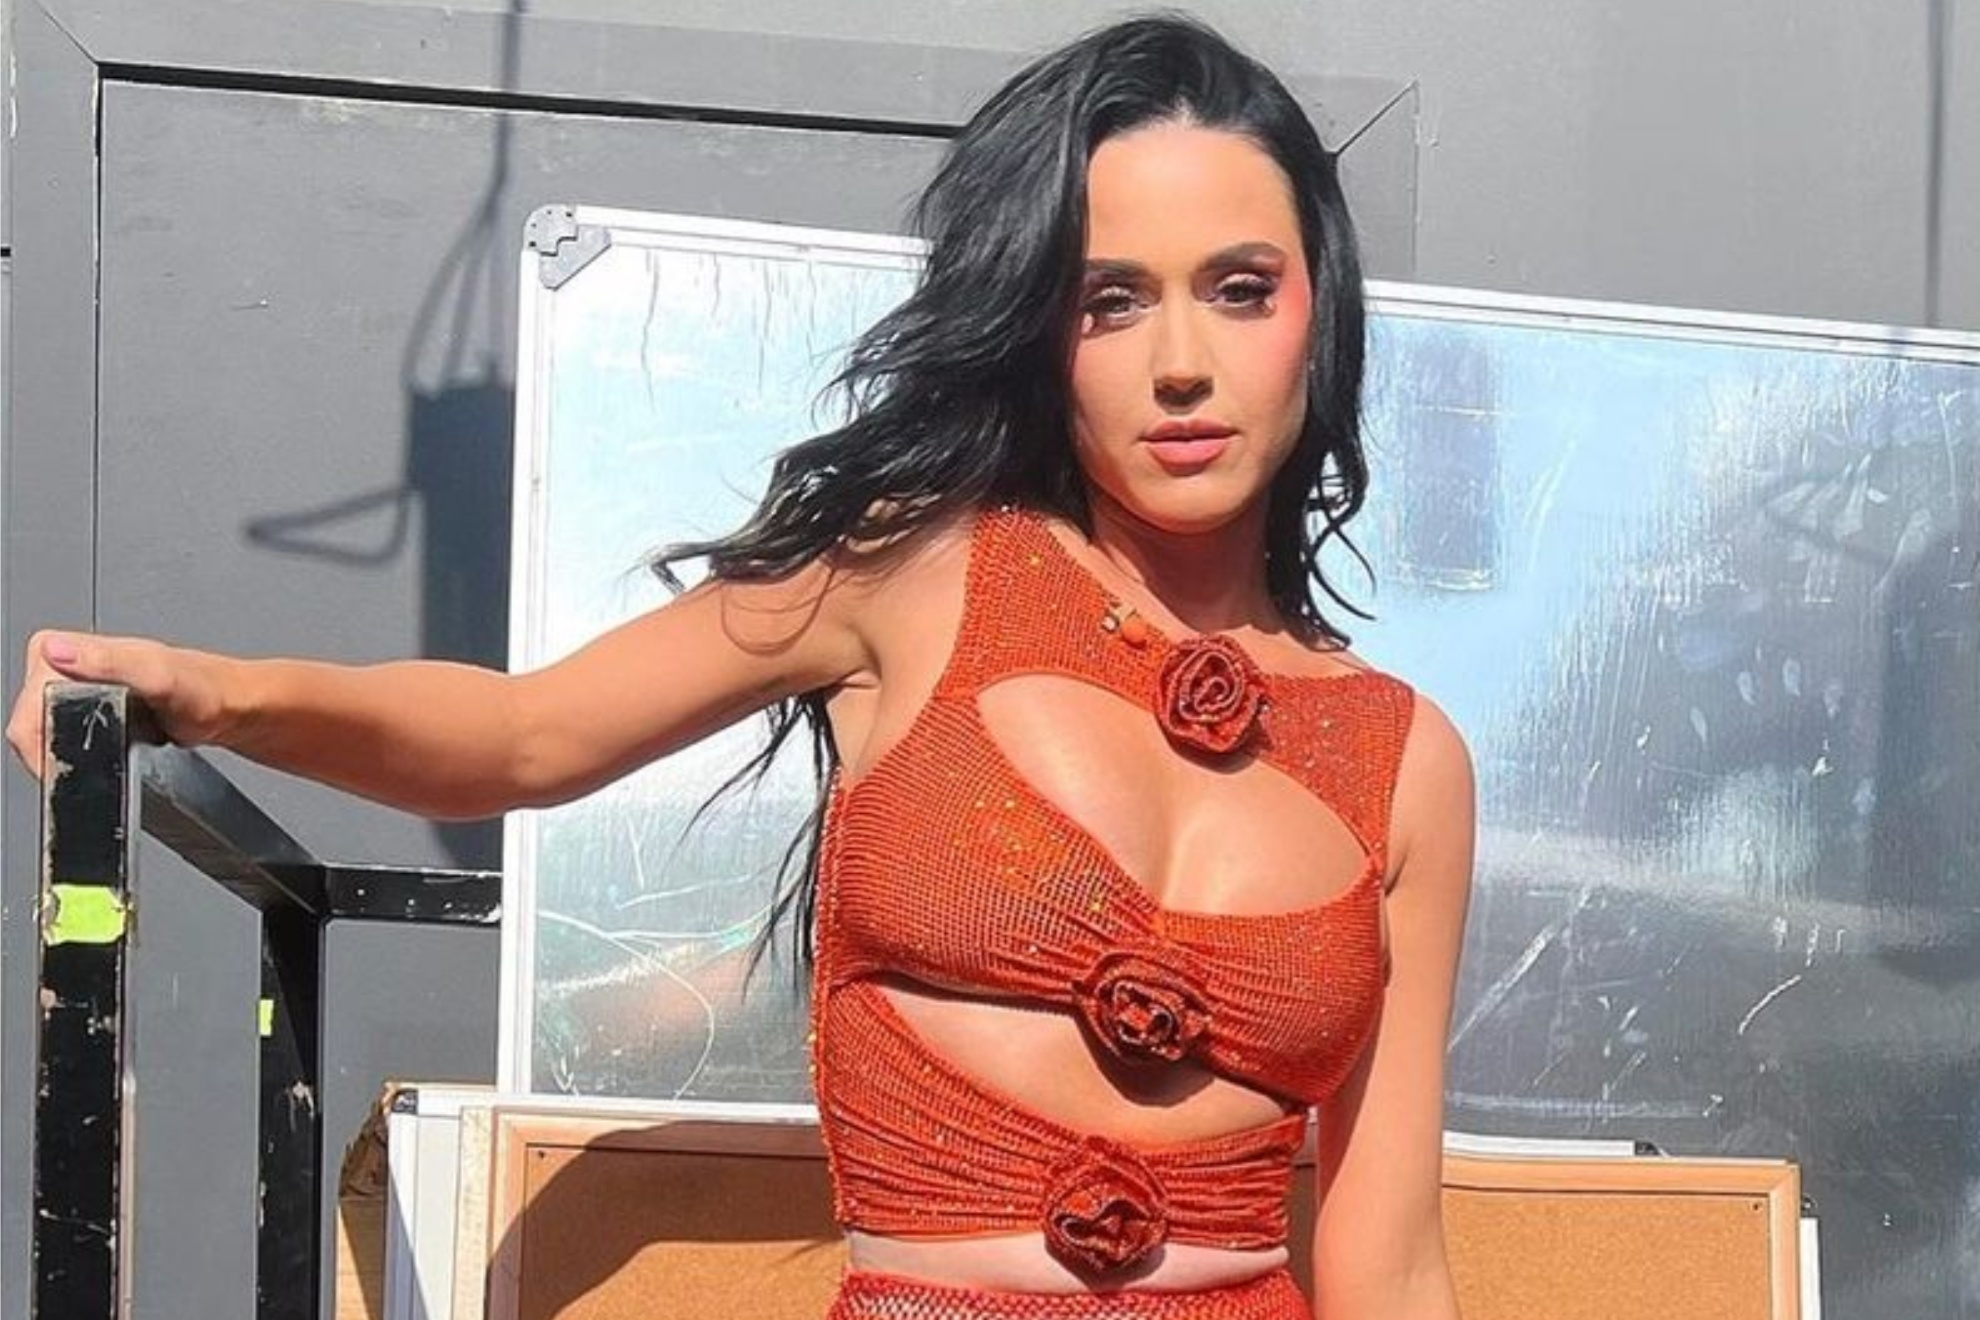 Katy Perrys net worth is estimated to be around $330 million dollars